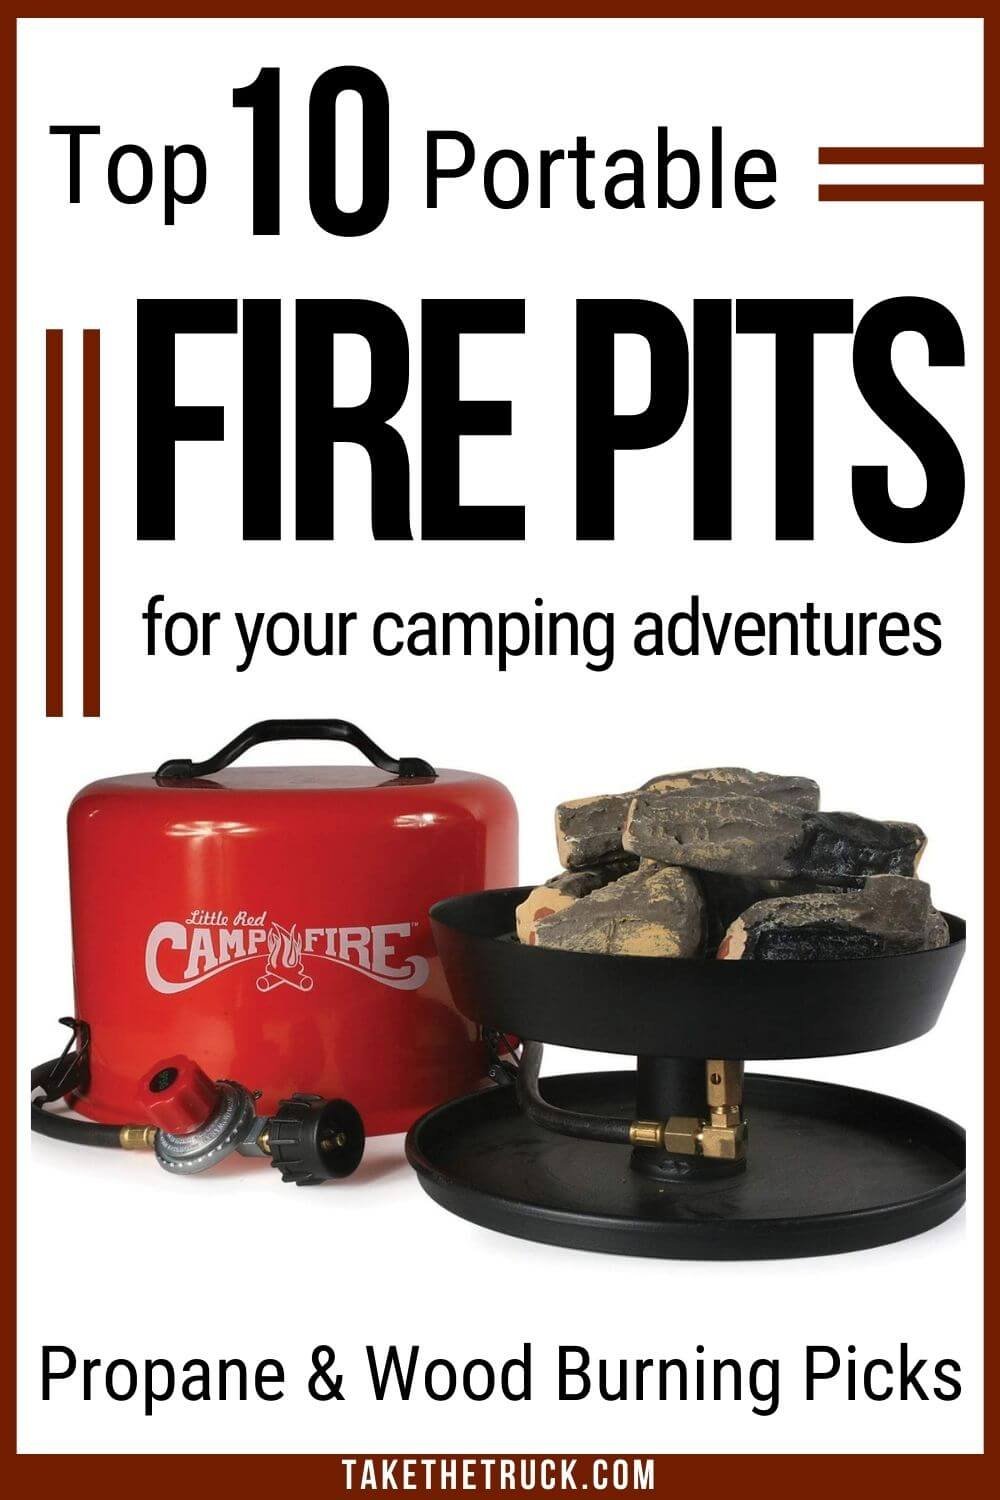 portable propane fire pit for camping - wood burning camping fire pit - Best portable fire pit for camping - portable camping fire pit - portable fireplace for camping